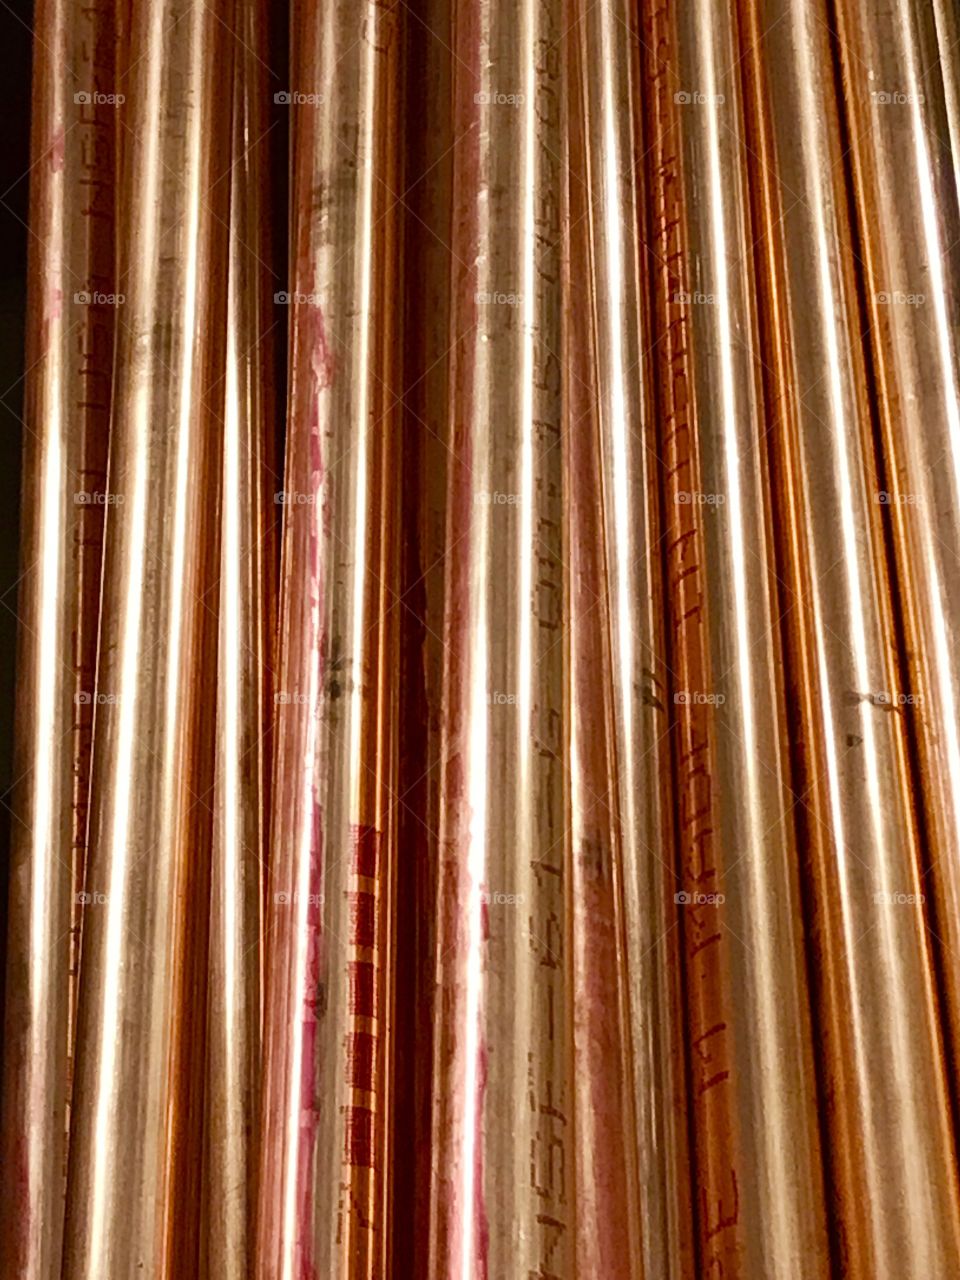 Copper pipes 